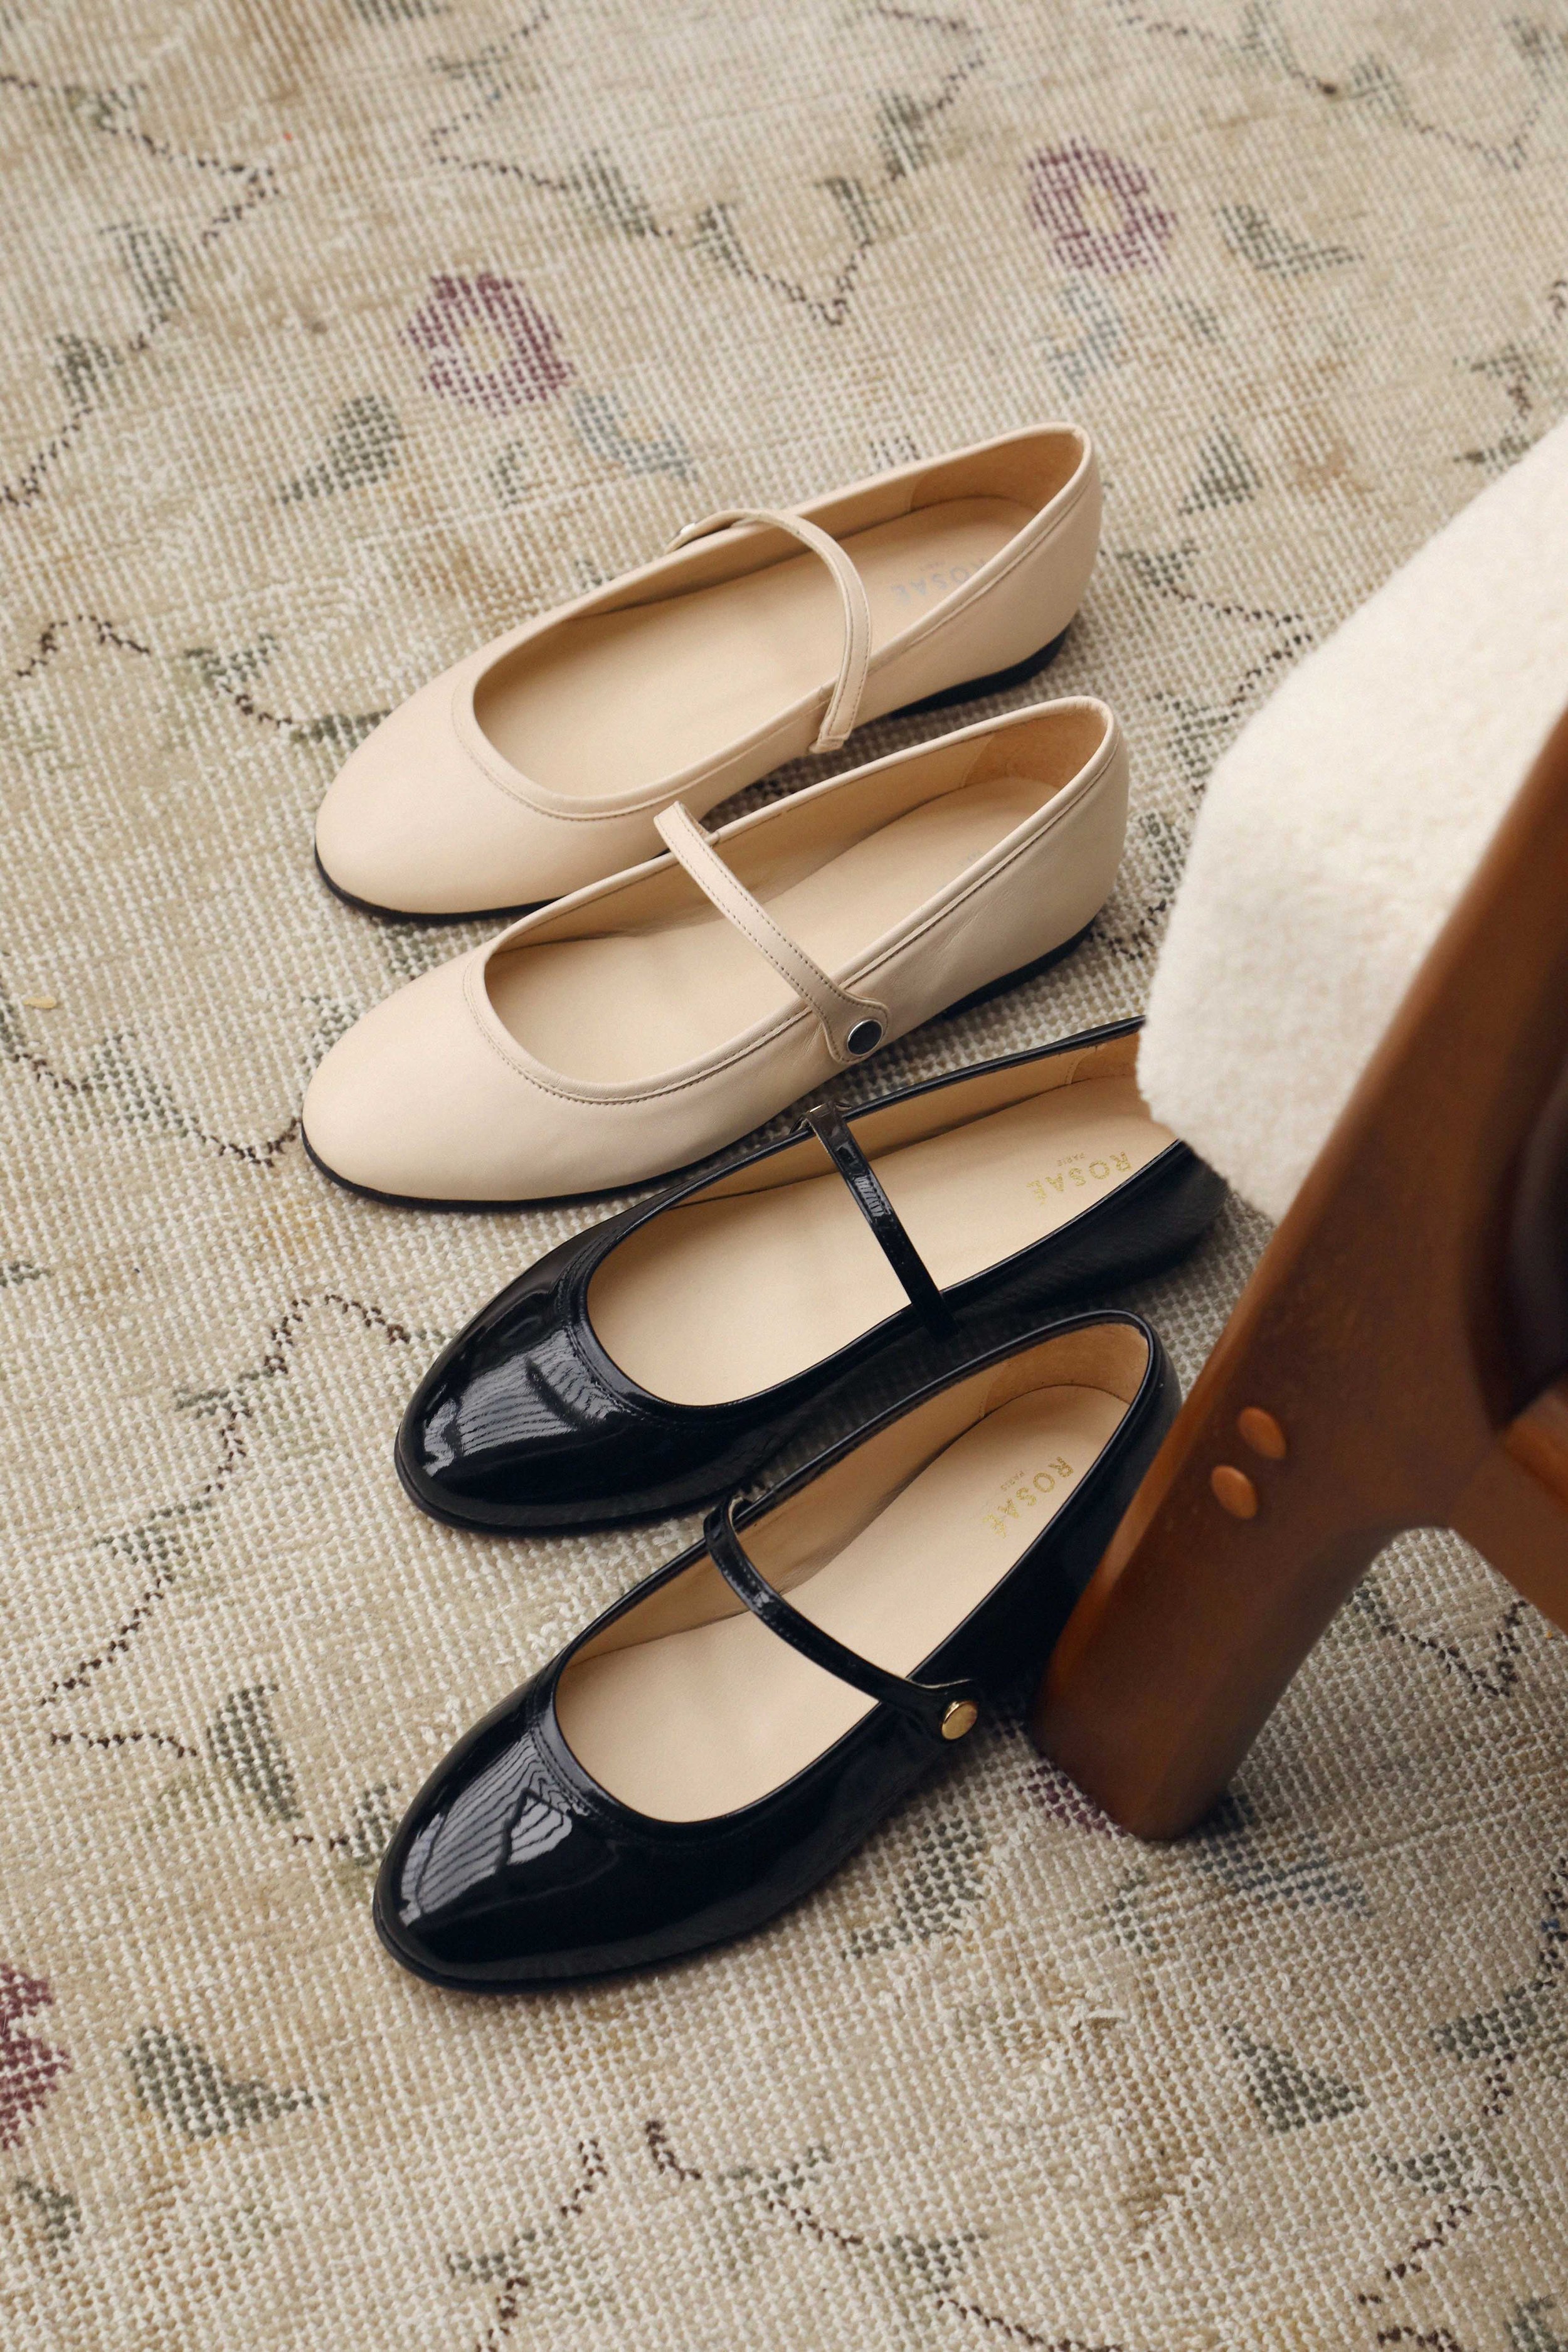 Les Georges - The Adorable Must-Have Mary Jane Flats We All Want This ...